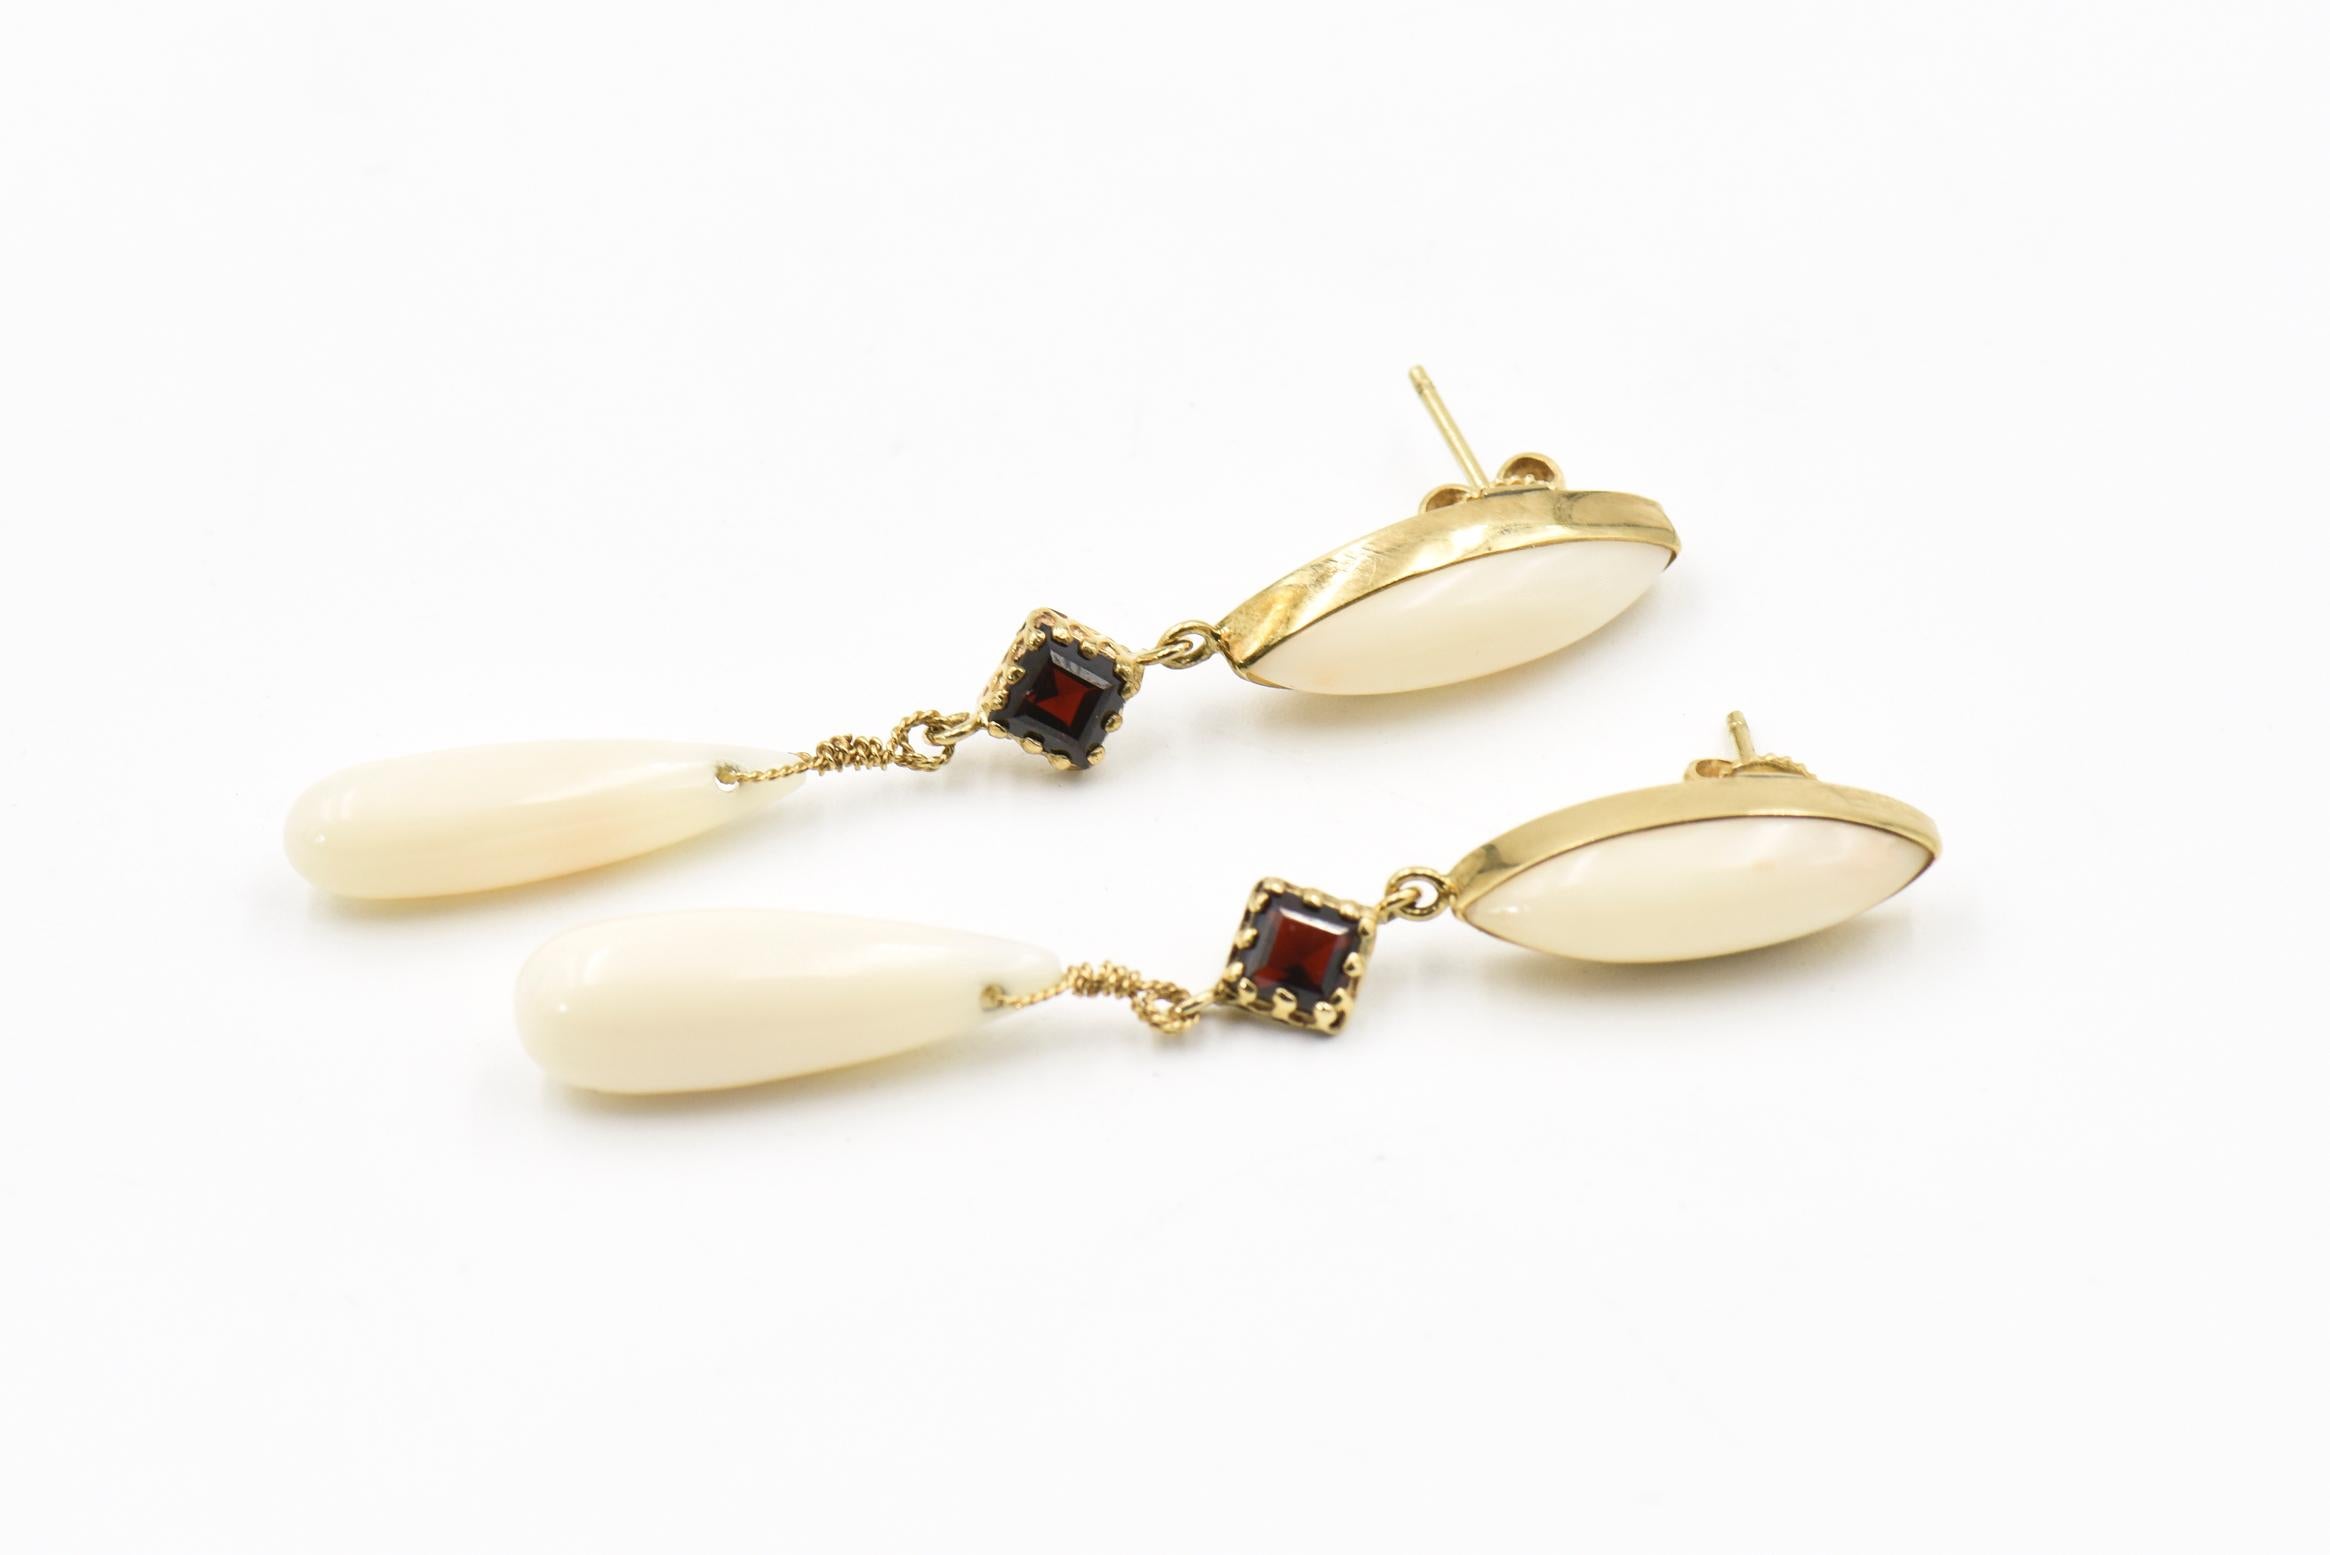 Cabochon Coral and Garnet Dangling Gold Earrings